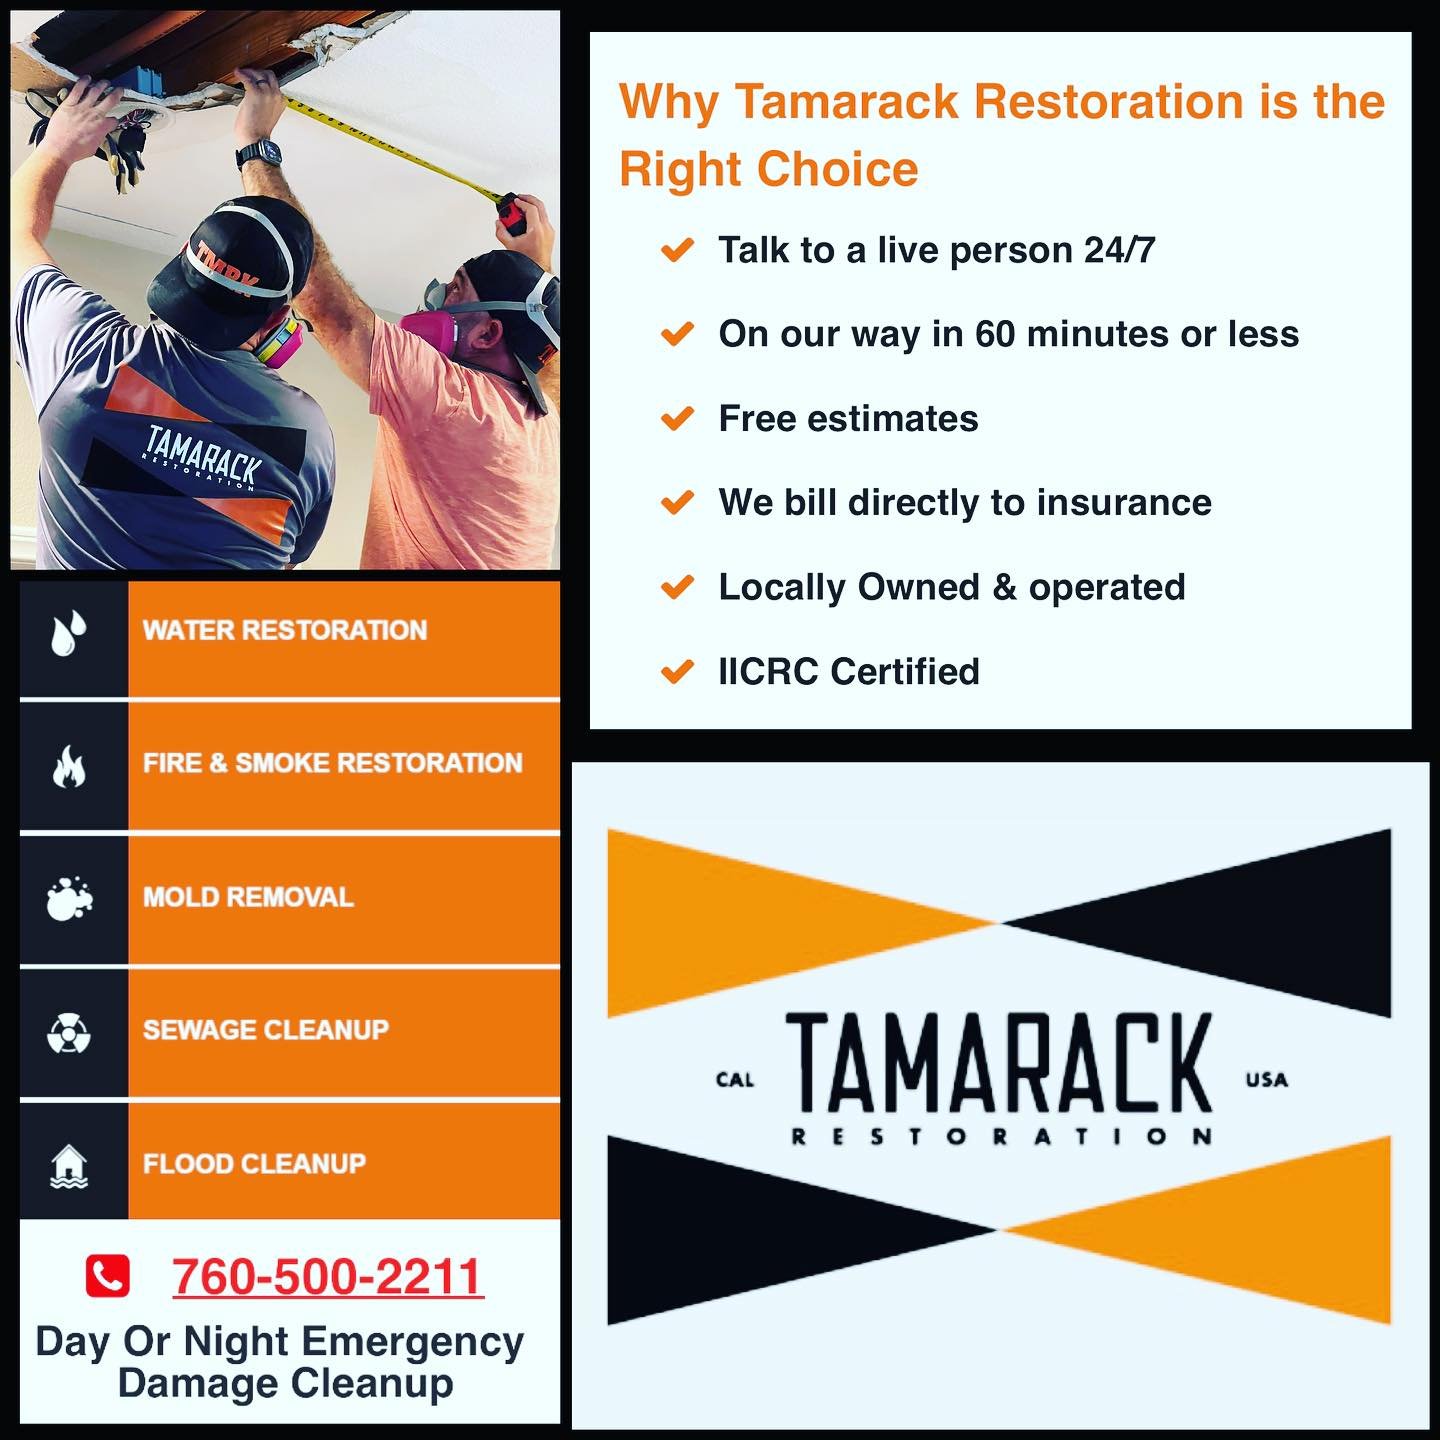 We are ready to help you any time of the day. If you need us, we are one call away!!! 
24/7 👉🏼 760.500.2211

.
.
.
#tamarackrestoration #waterdamage #iicrccertified #sandiegocountybusiness #molddamagerepair #carlsbadsmallbusiness